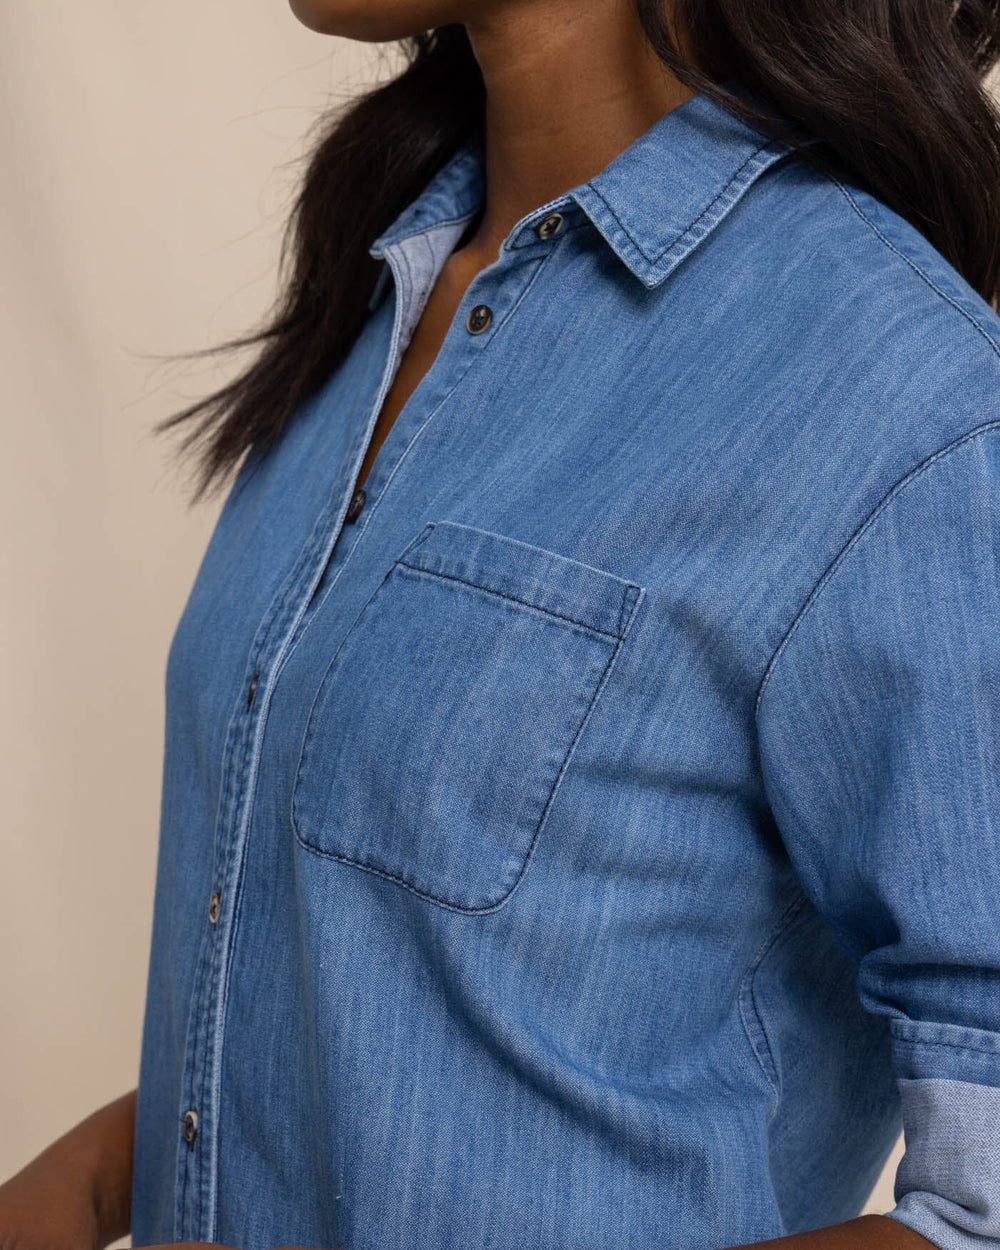 The detail view of the Southern Tide Cam Denim Dress by Southern Tide - Medium Wash Indigo